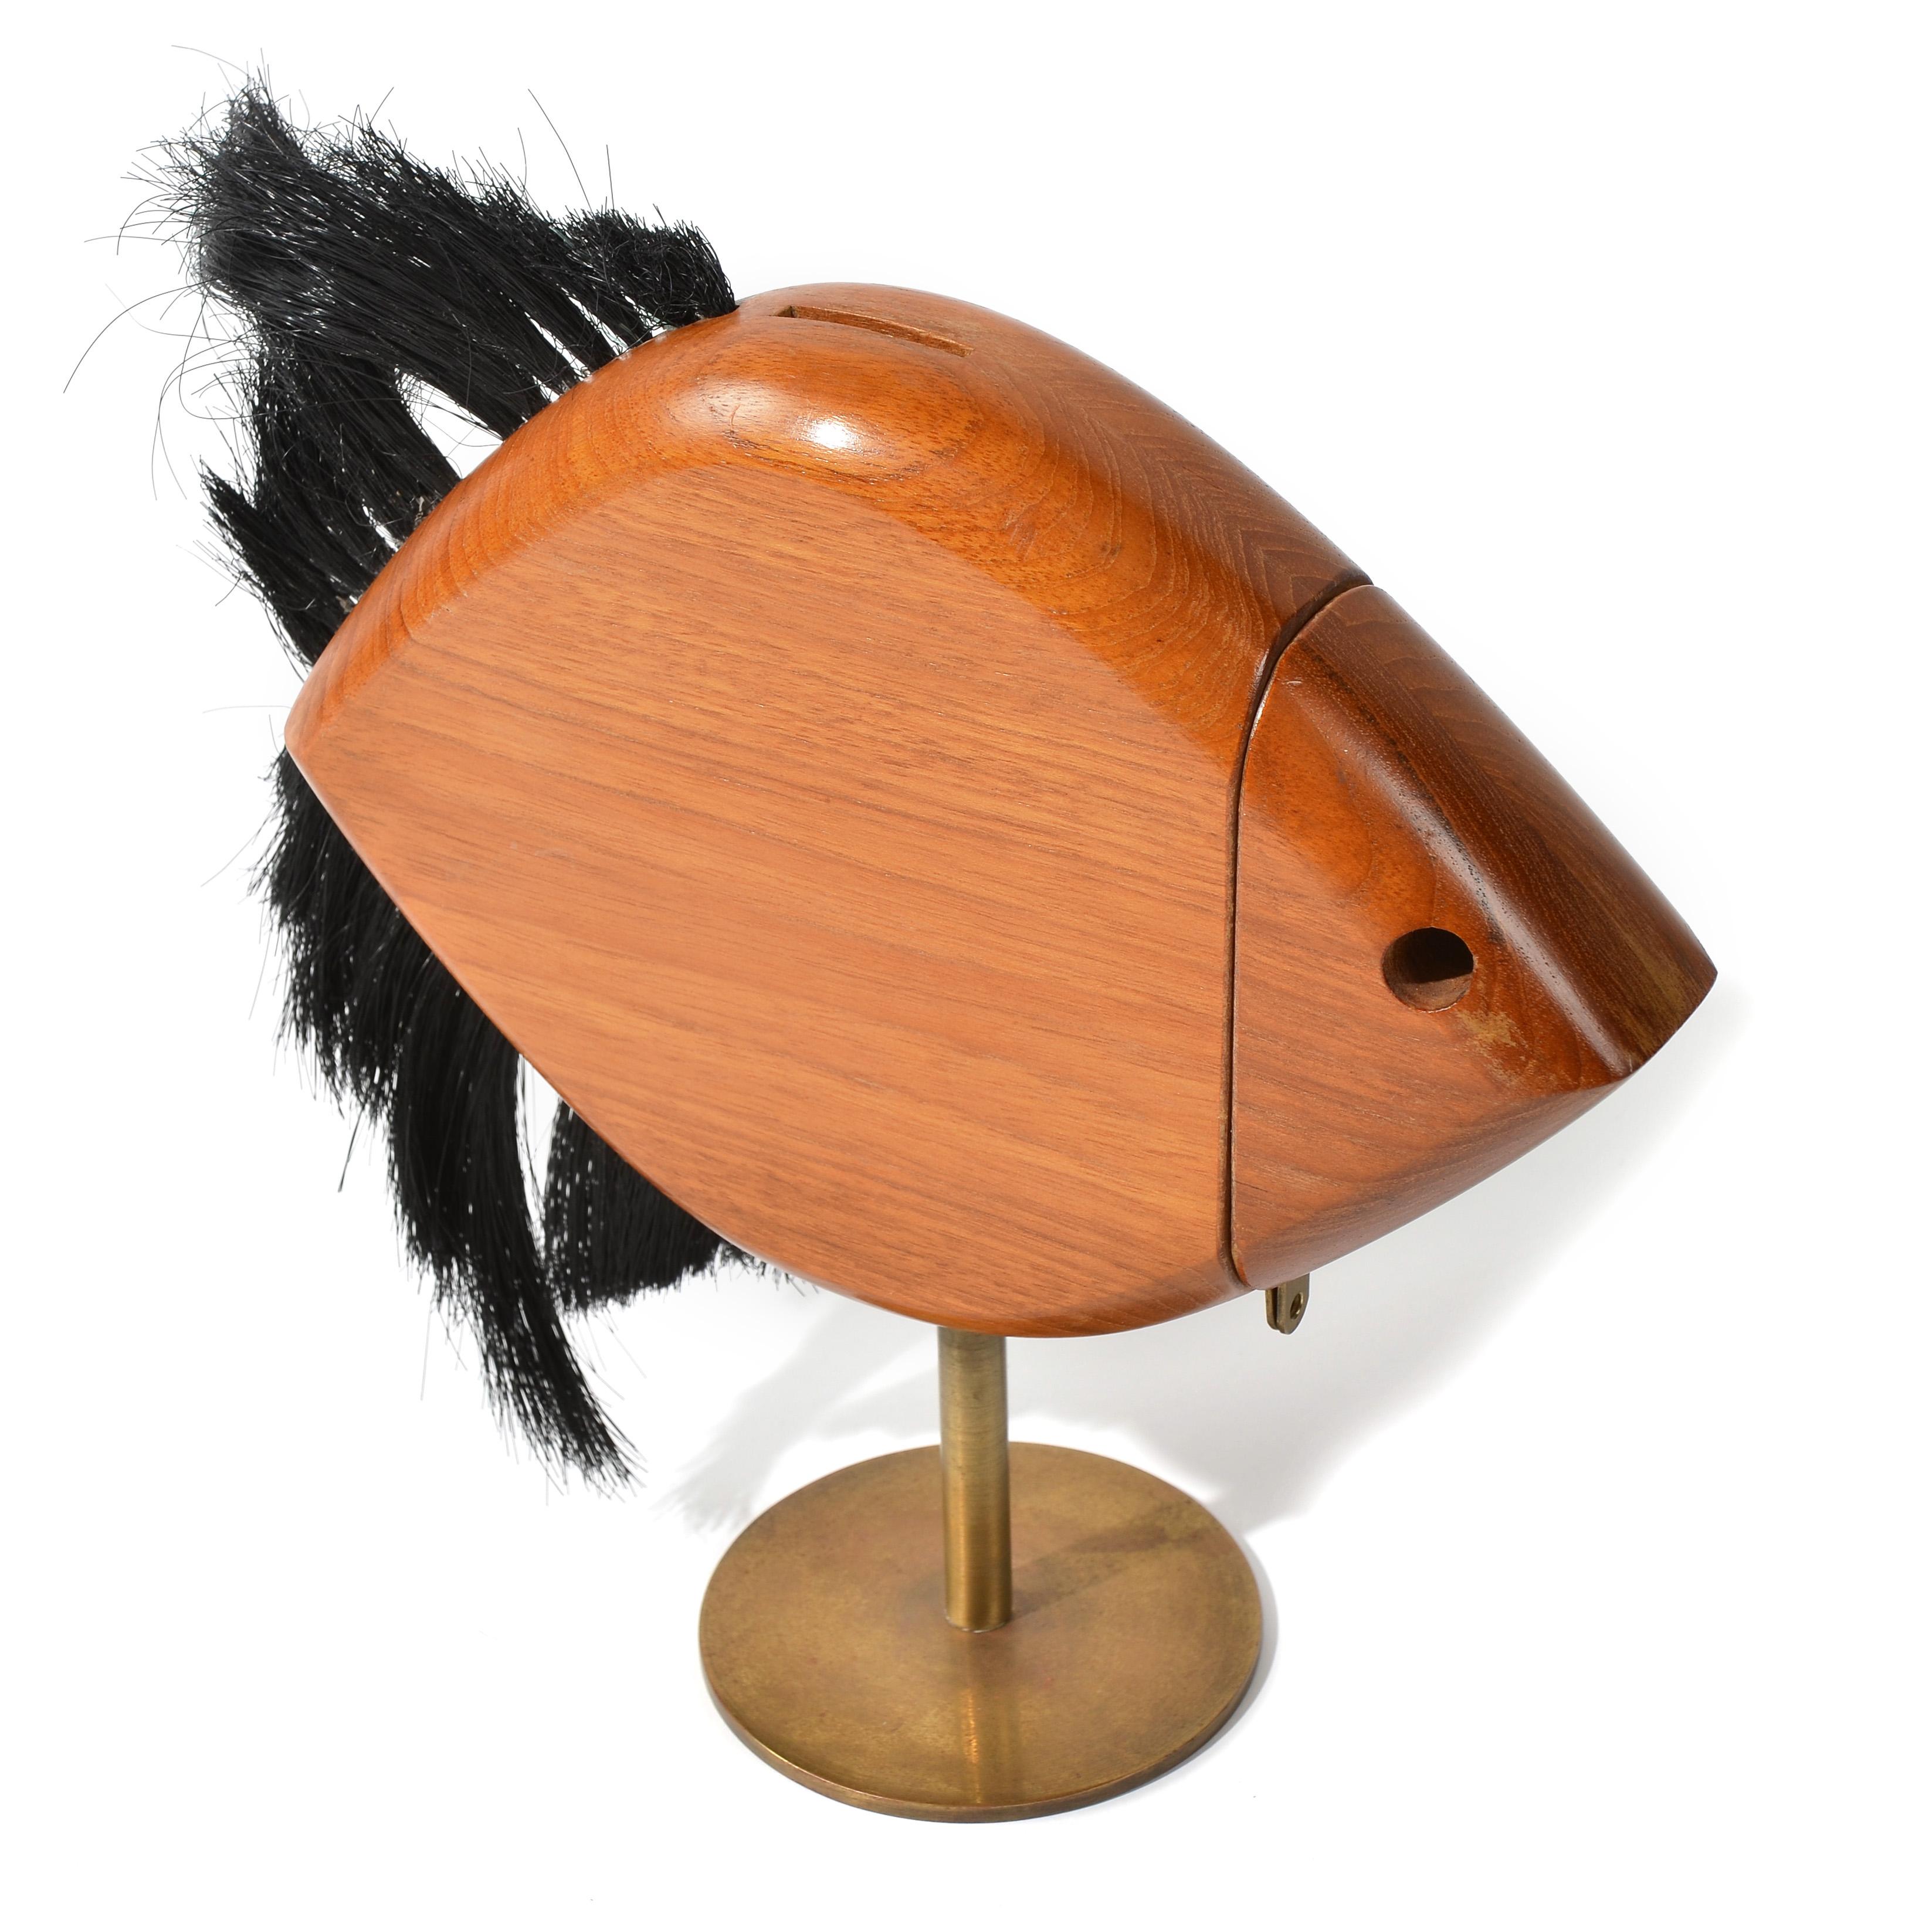 A wooden savings bank sculpted in the form of a fish designed by Carl Aubock. The black synthetic bristle fins and brass rod mounted form create an illusory swimming movement. The head is removable, to empty the bank, but can be locked with a small